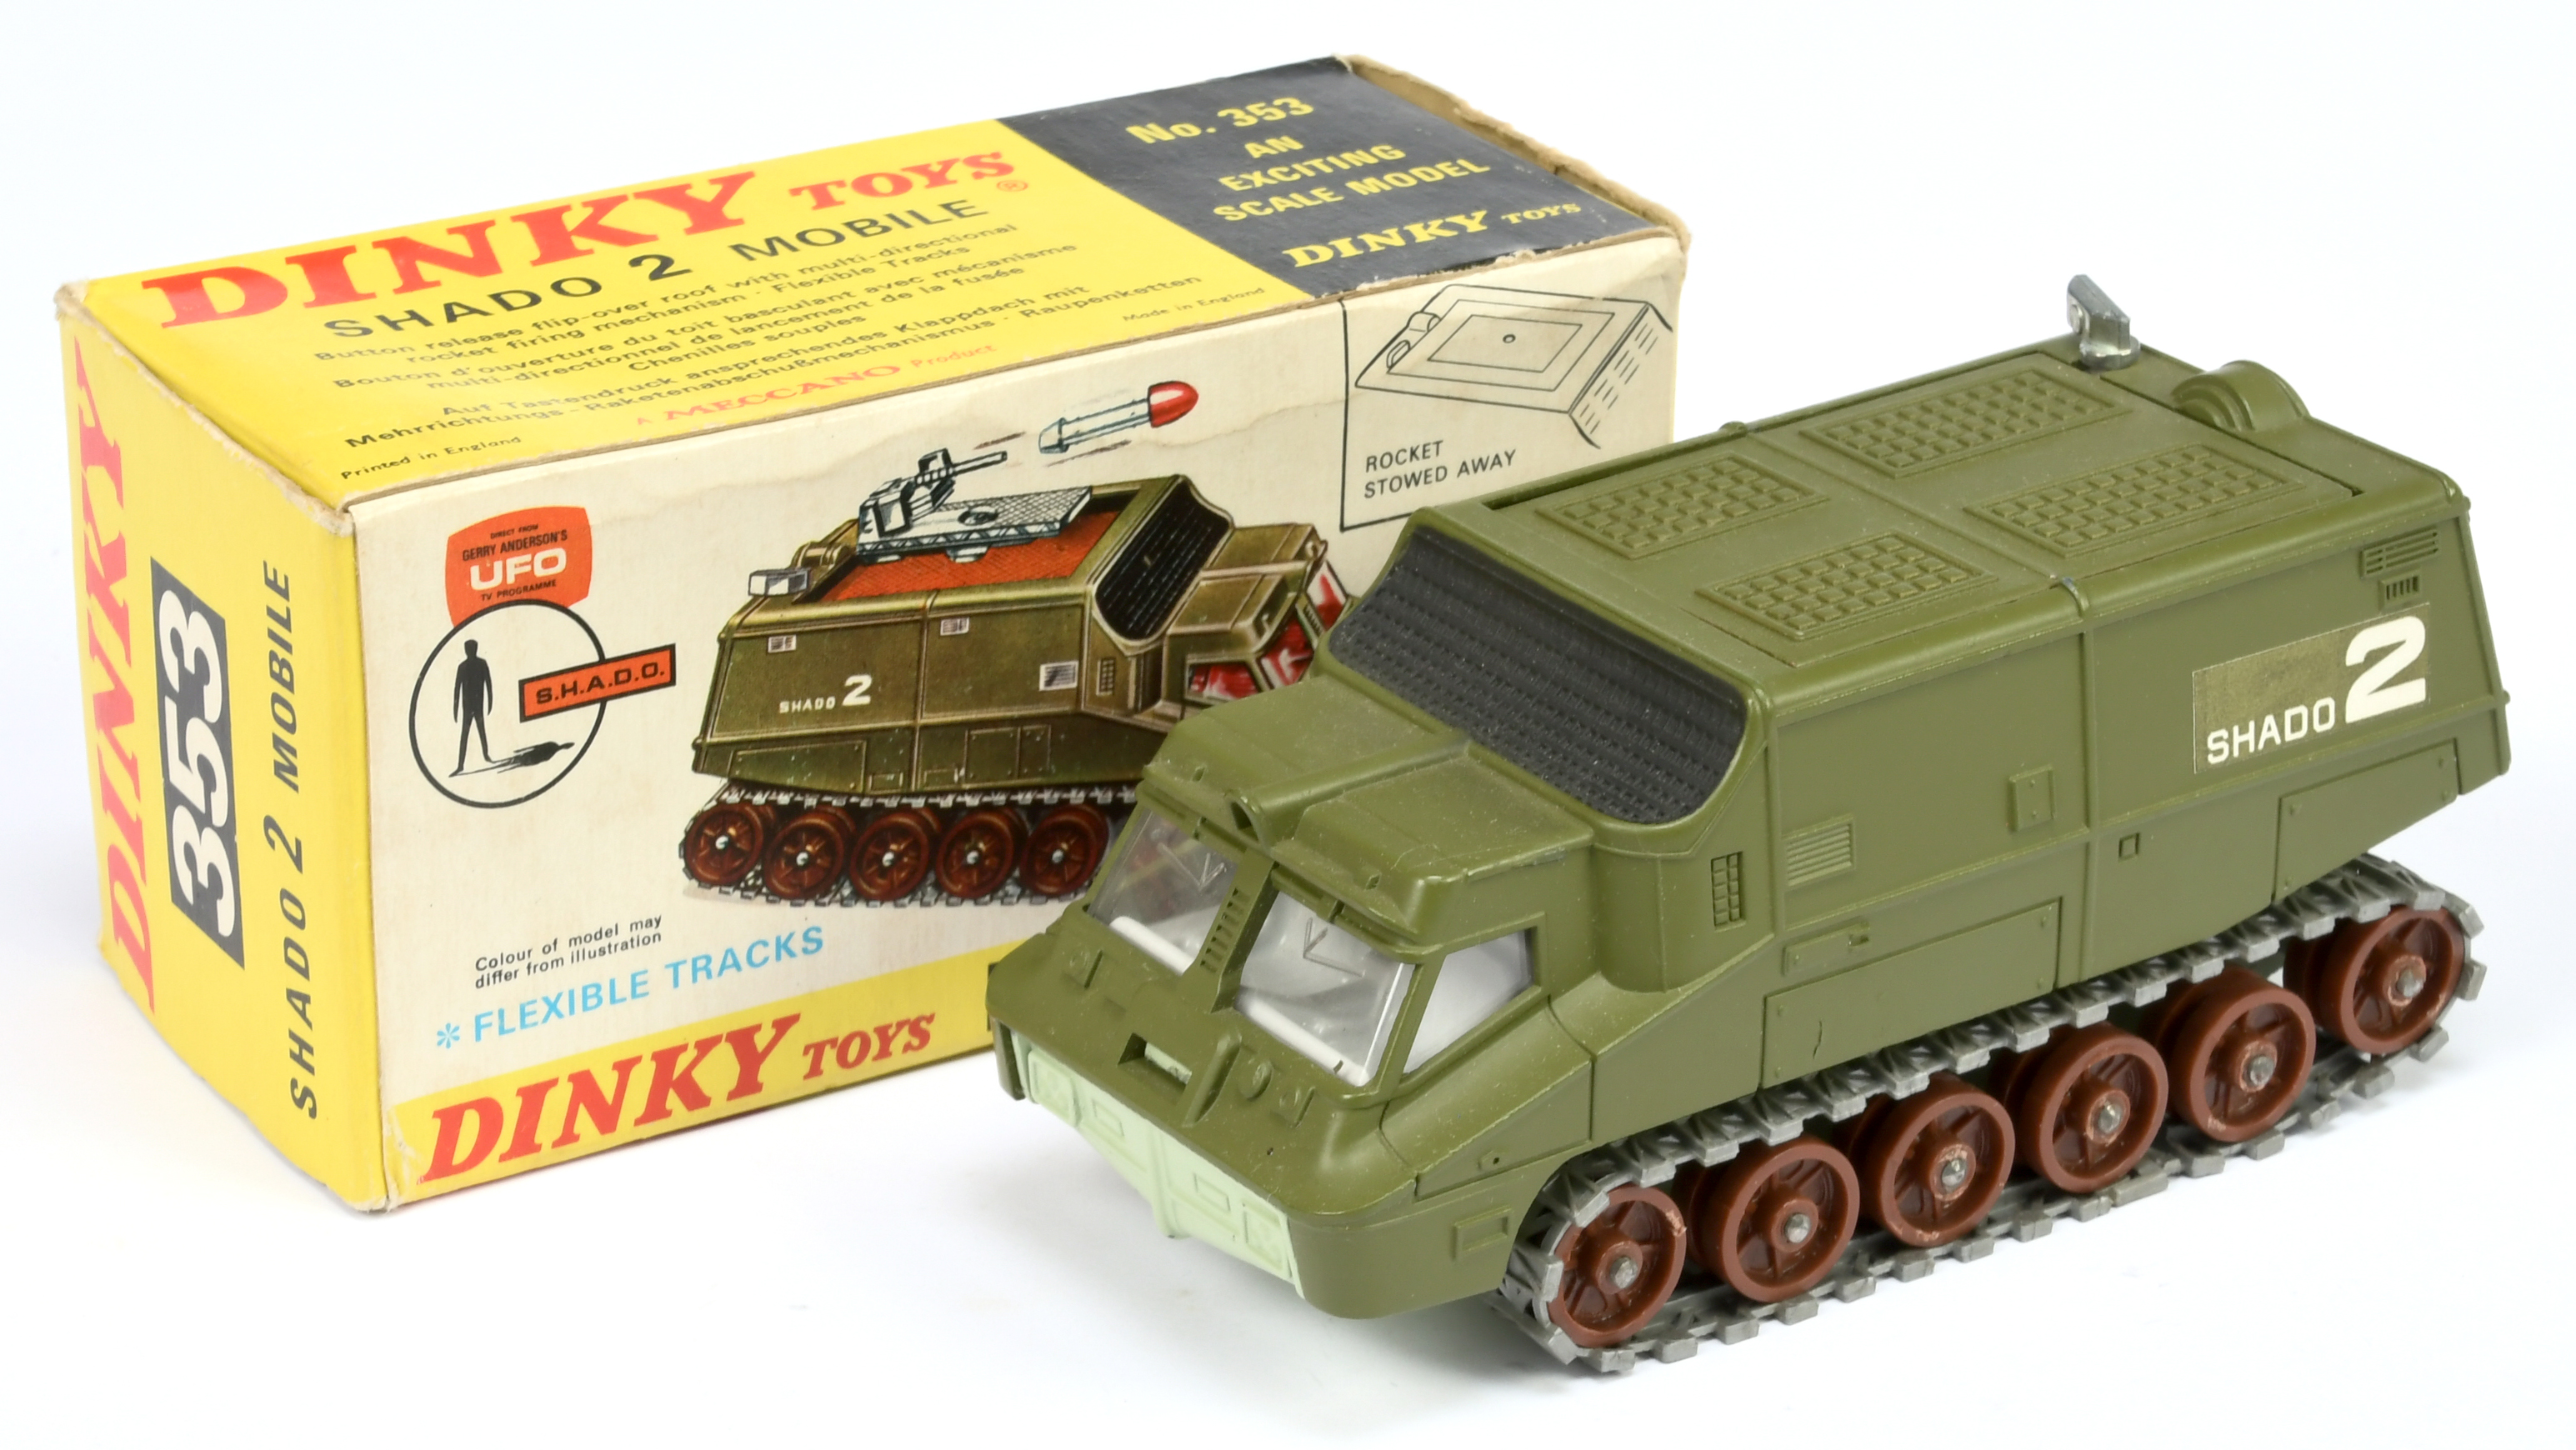 Dinky Toys 353 "UFO"  Shado 2 Mobile   - Green including roof, pale green base, pale grey interio...